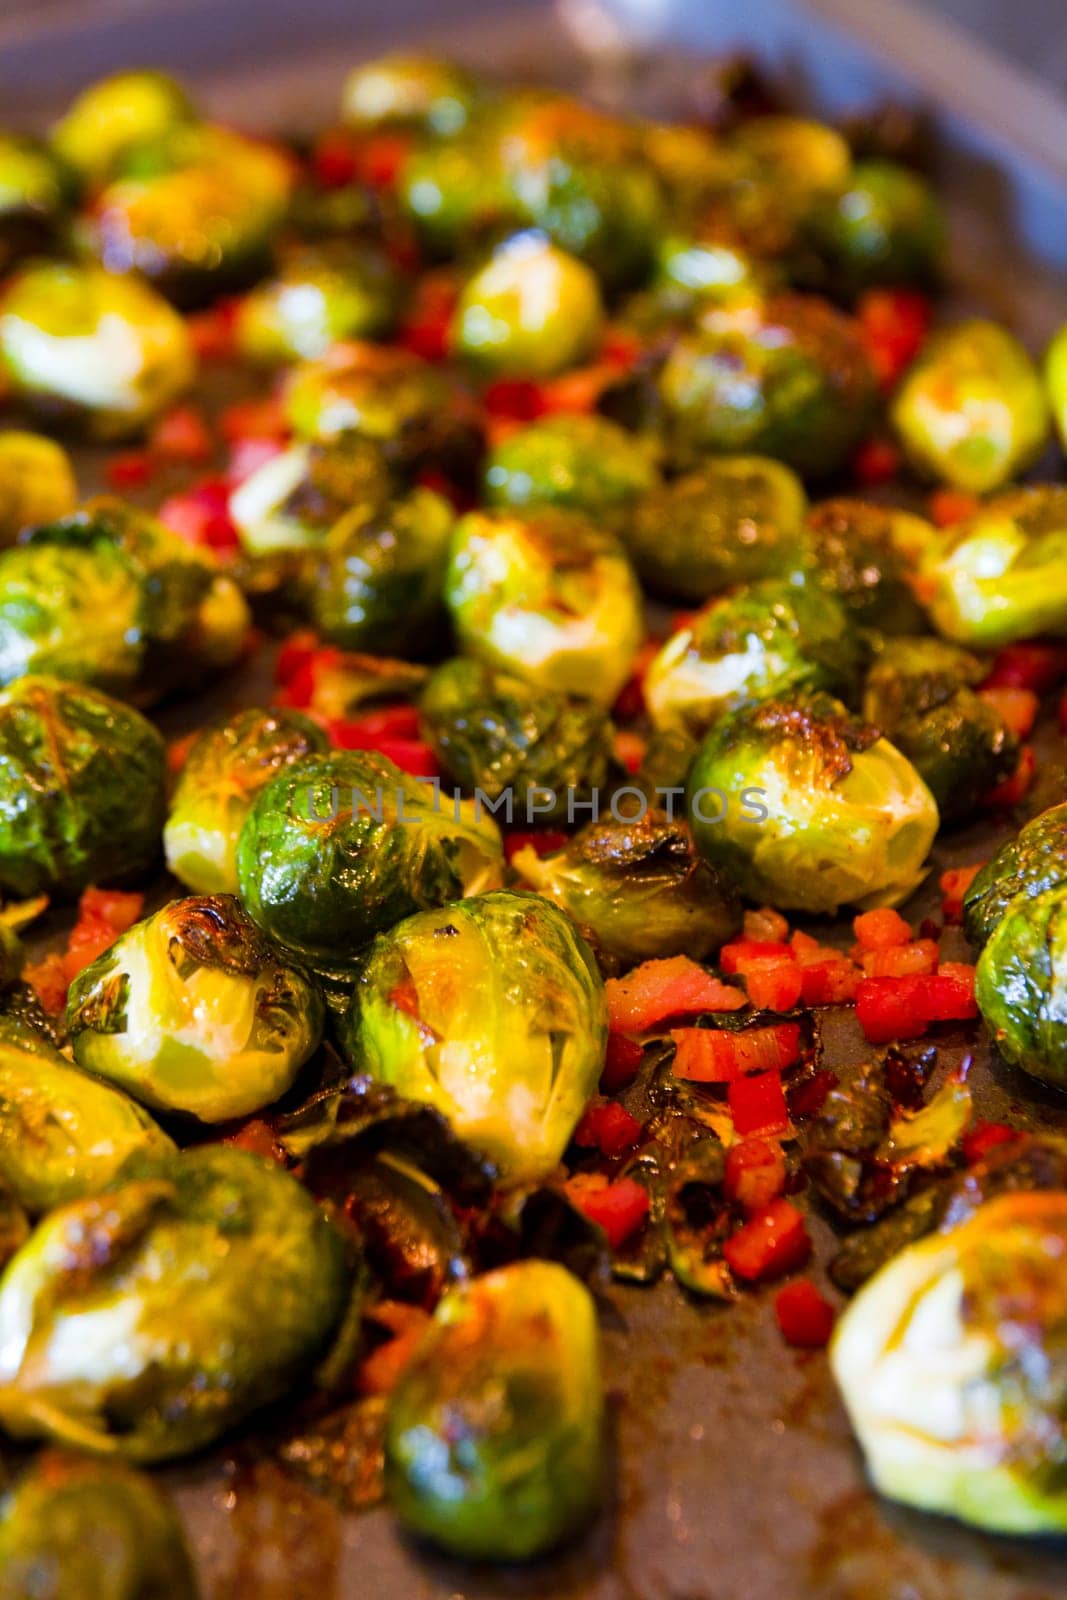 Deliciously Roasted Brussels Sprouts with Vibrant Red Bell Pepper - A mouthwatering and healthy vegetarian dish showcasing perfectly caramelized brussels sprouts and colorful bell peppers. Ideal for food blogs and recipe websites.